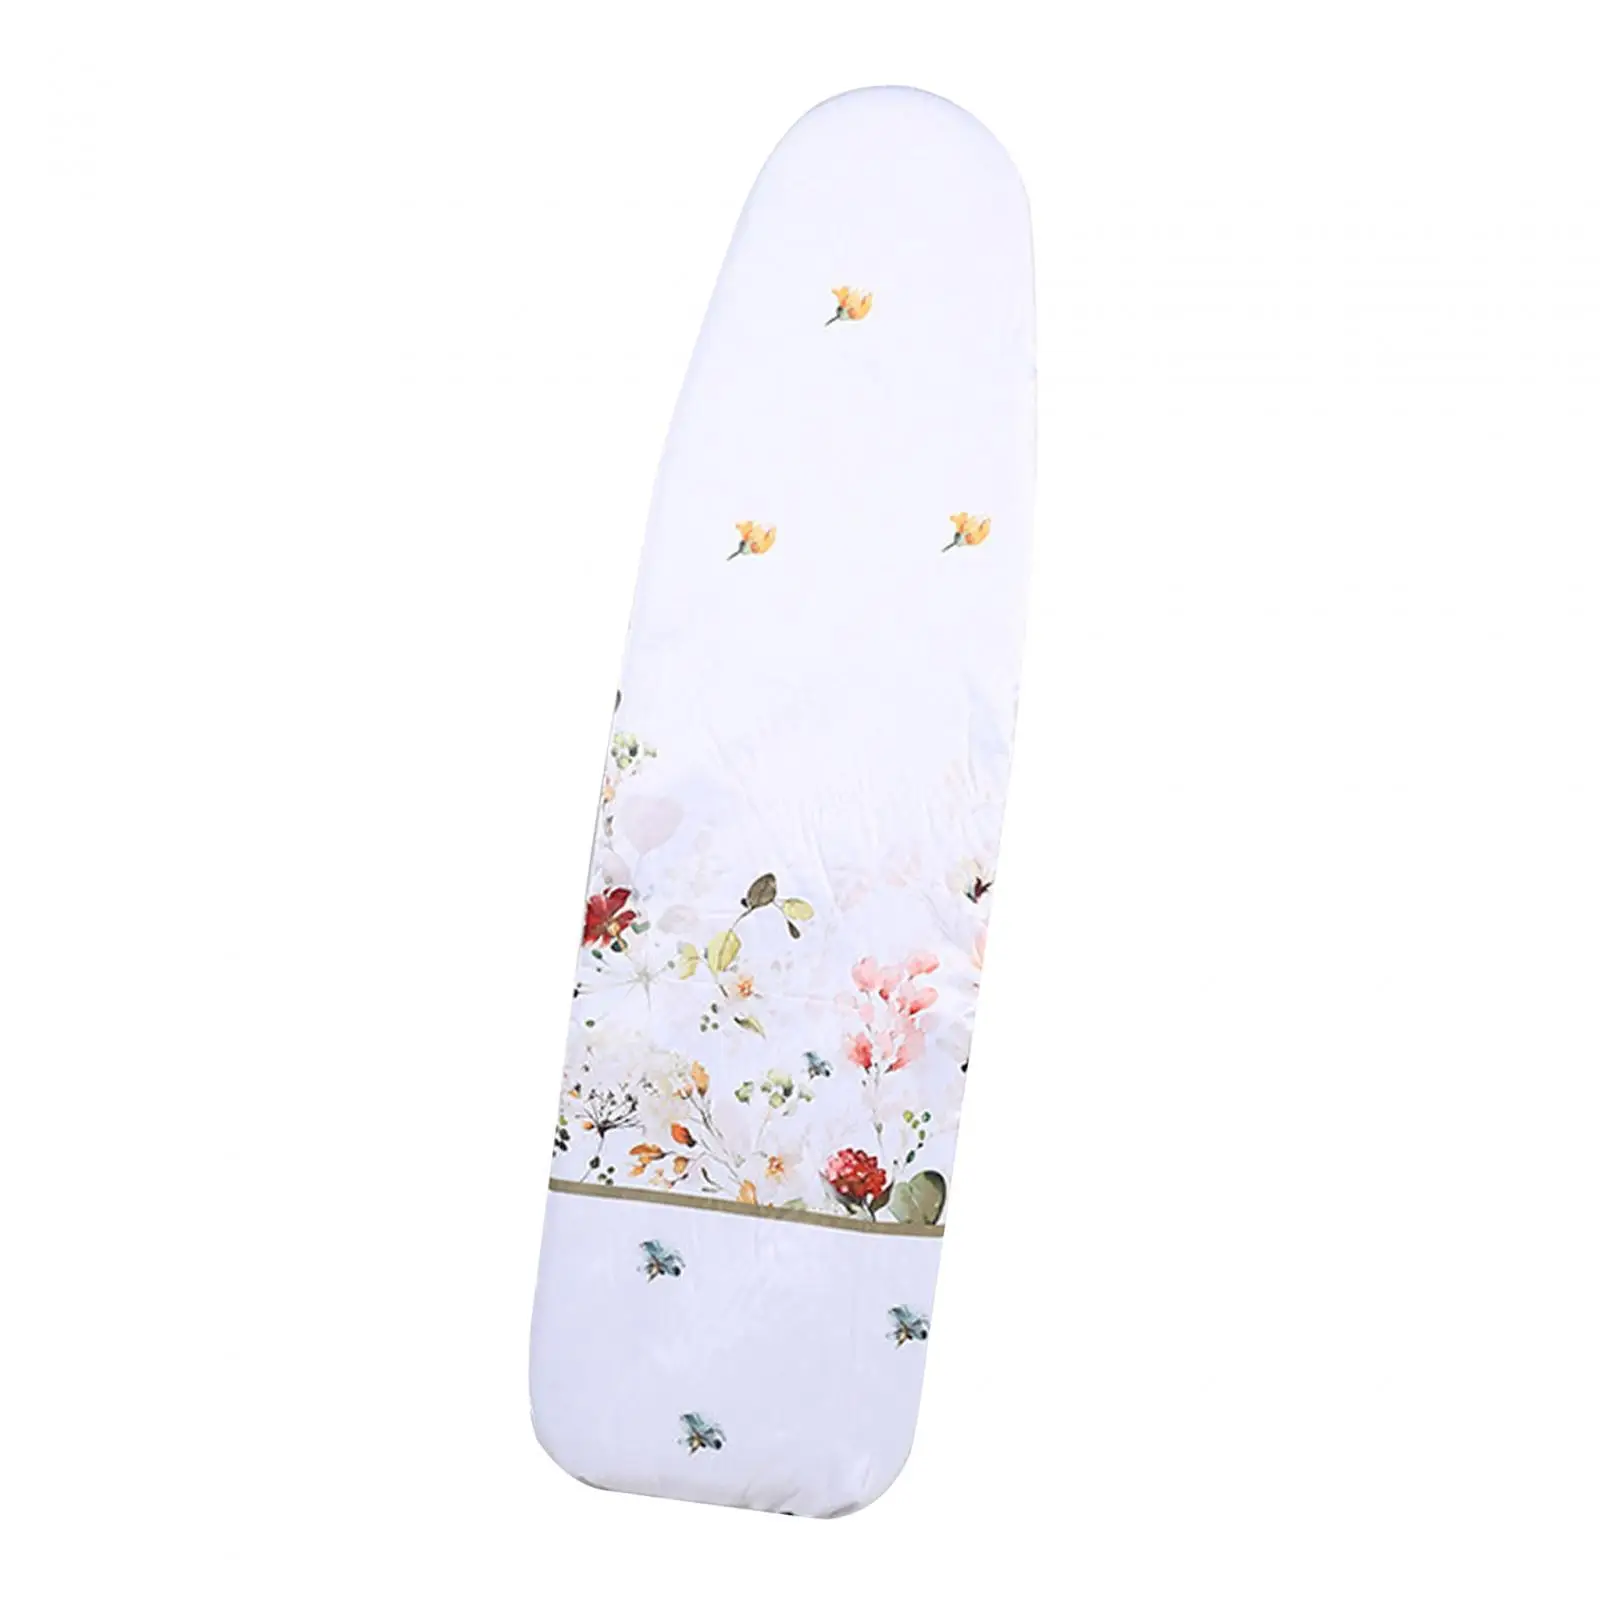 Ironing Board Protective Cover Replacement Covers Protective Organizer Cover Ironing Board Dustproof Cover Ironing Board Cover